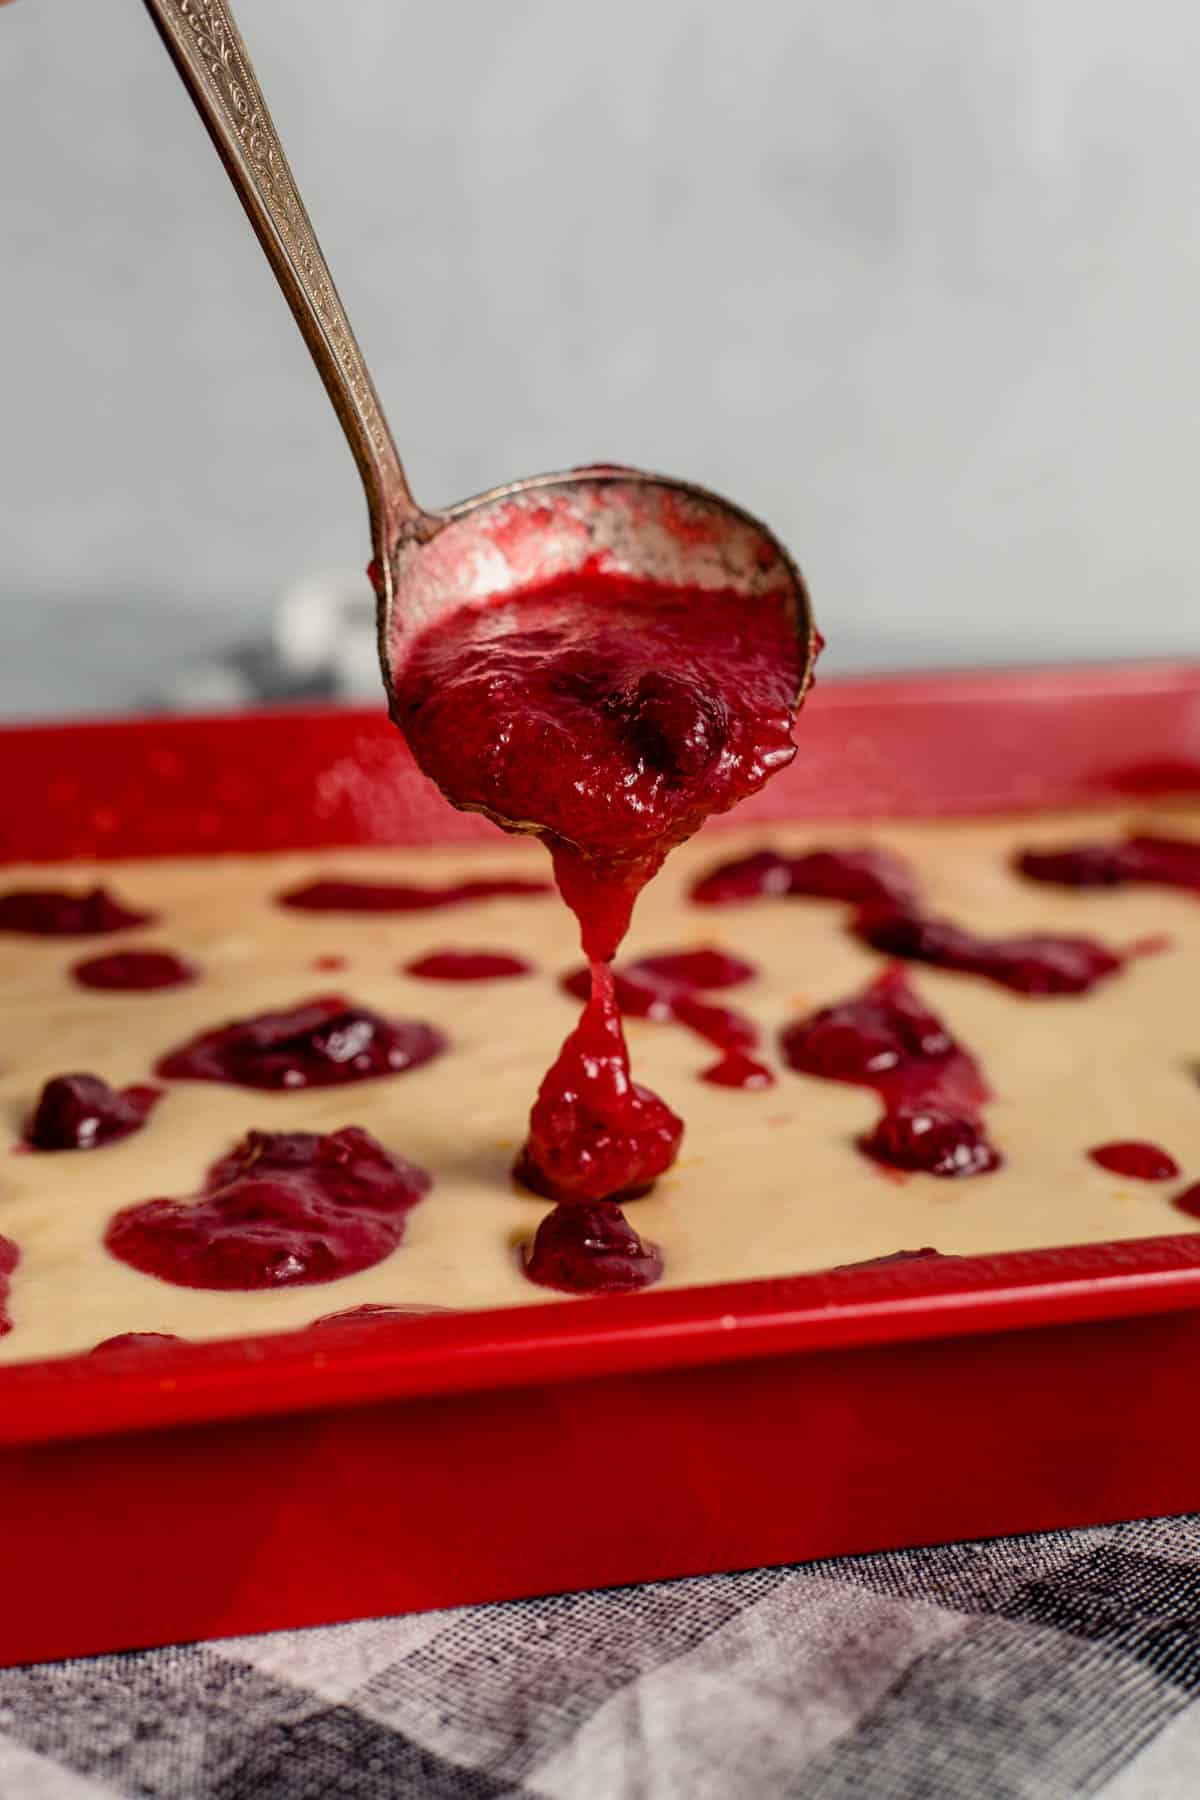 cranberry sauce is in a ladle being poured on top of the batter in the red baking dish